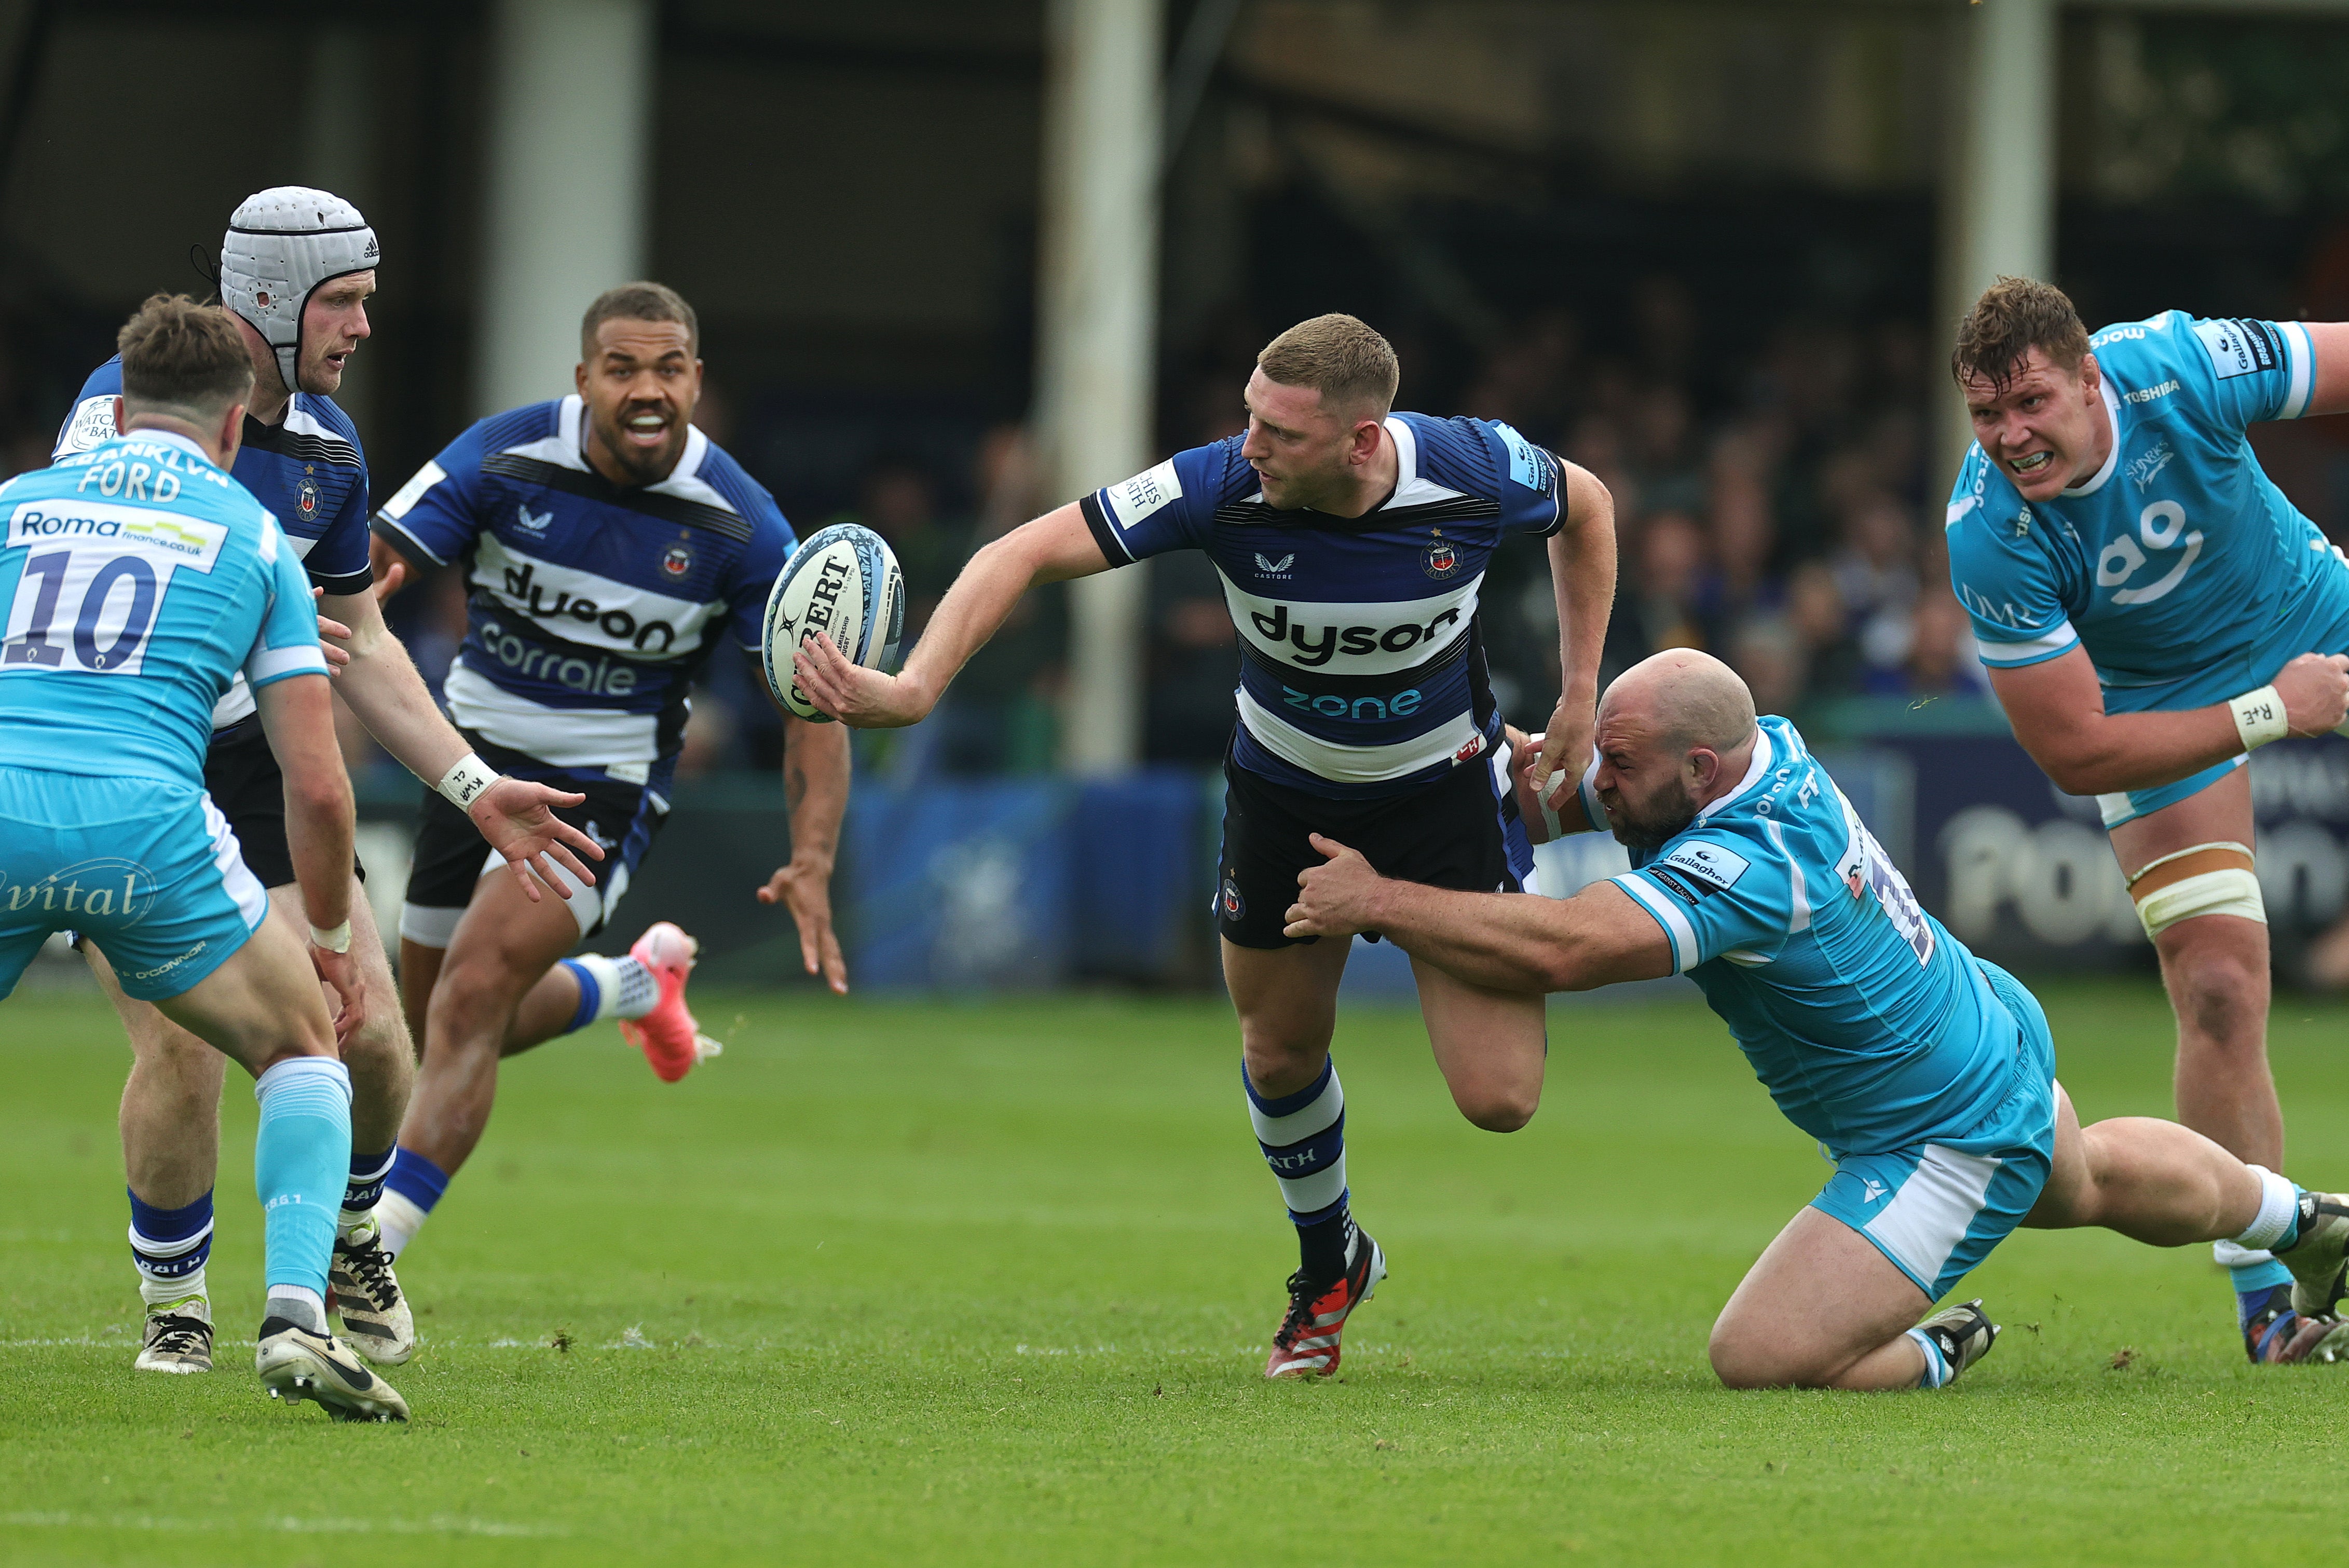 Finn Russell has been influential as a player and leader for Bath this season